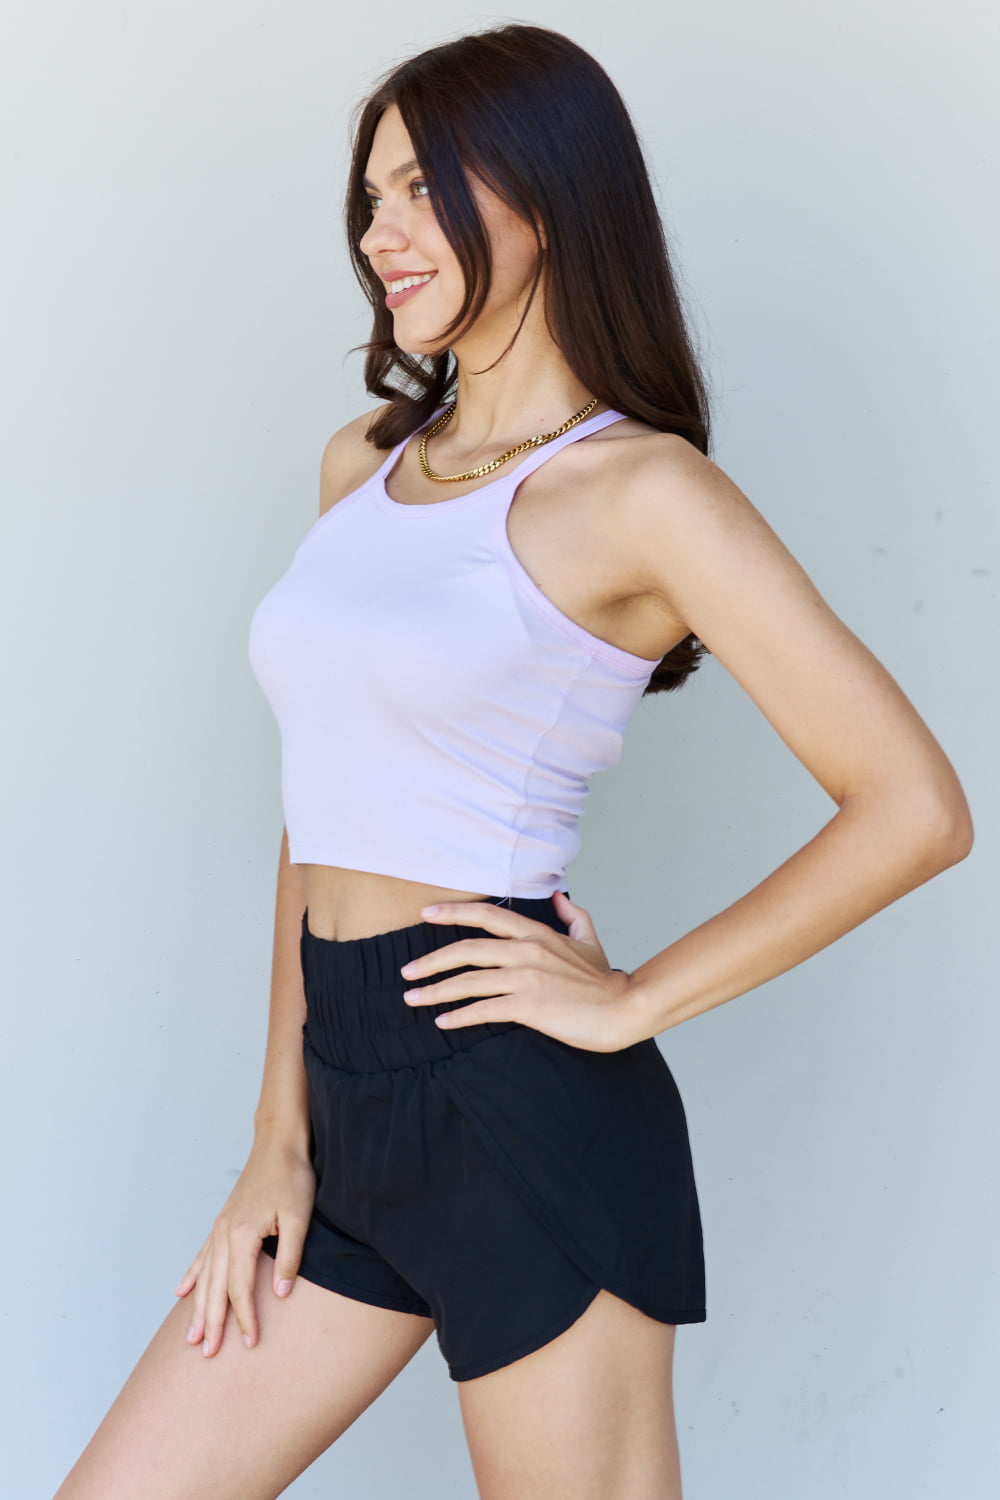 Light Gray Ninexis Everyday Staple Soft Modal Short Strap Ribbed Tank Top in Lavender Sentient Beauty Fashions Apparel & Accessories